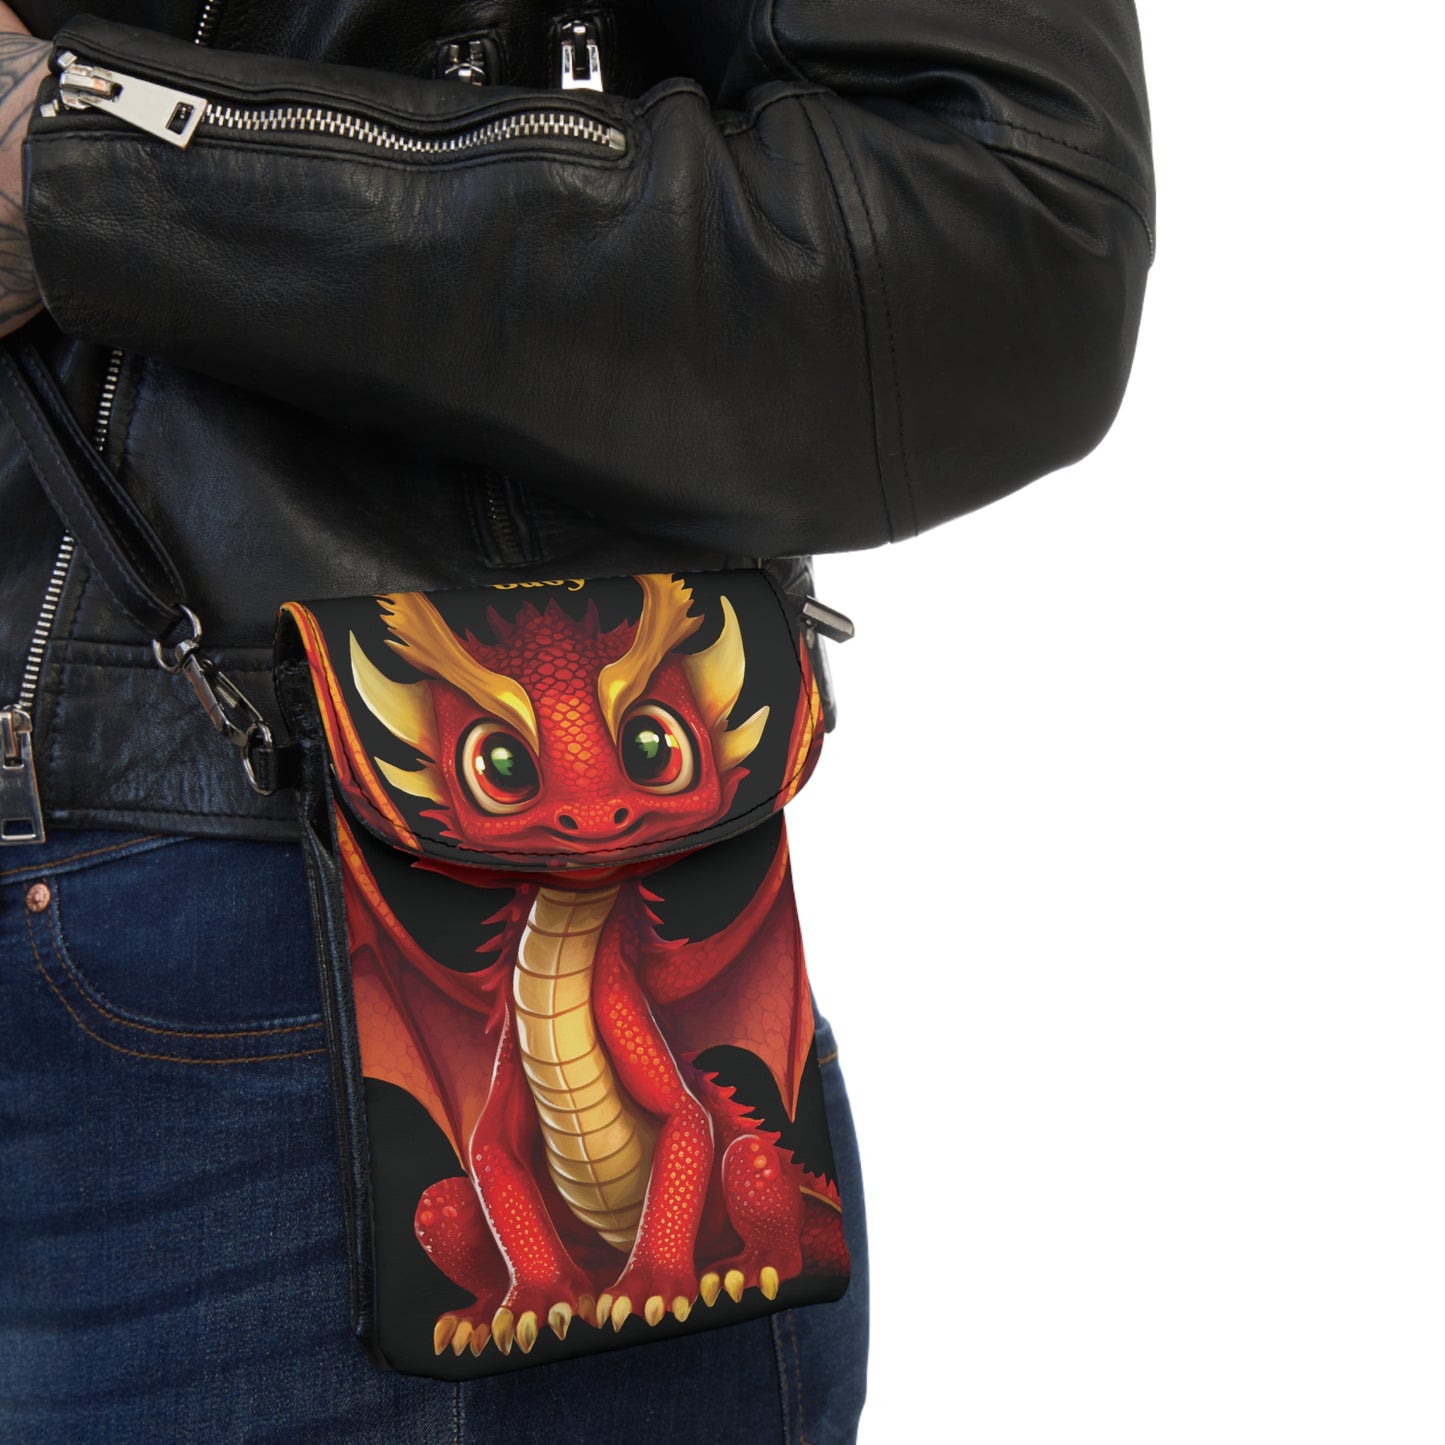 Naughty Fire Dragons Small Cell Phone Wallet - Perfect Gift For Teens & Spicy (fun) People